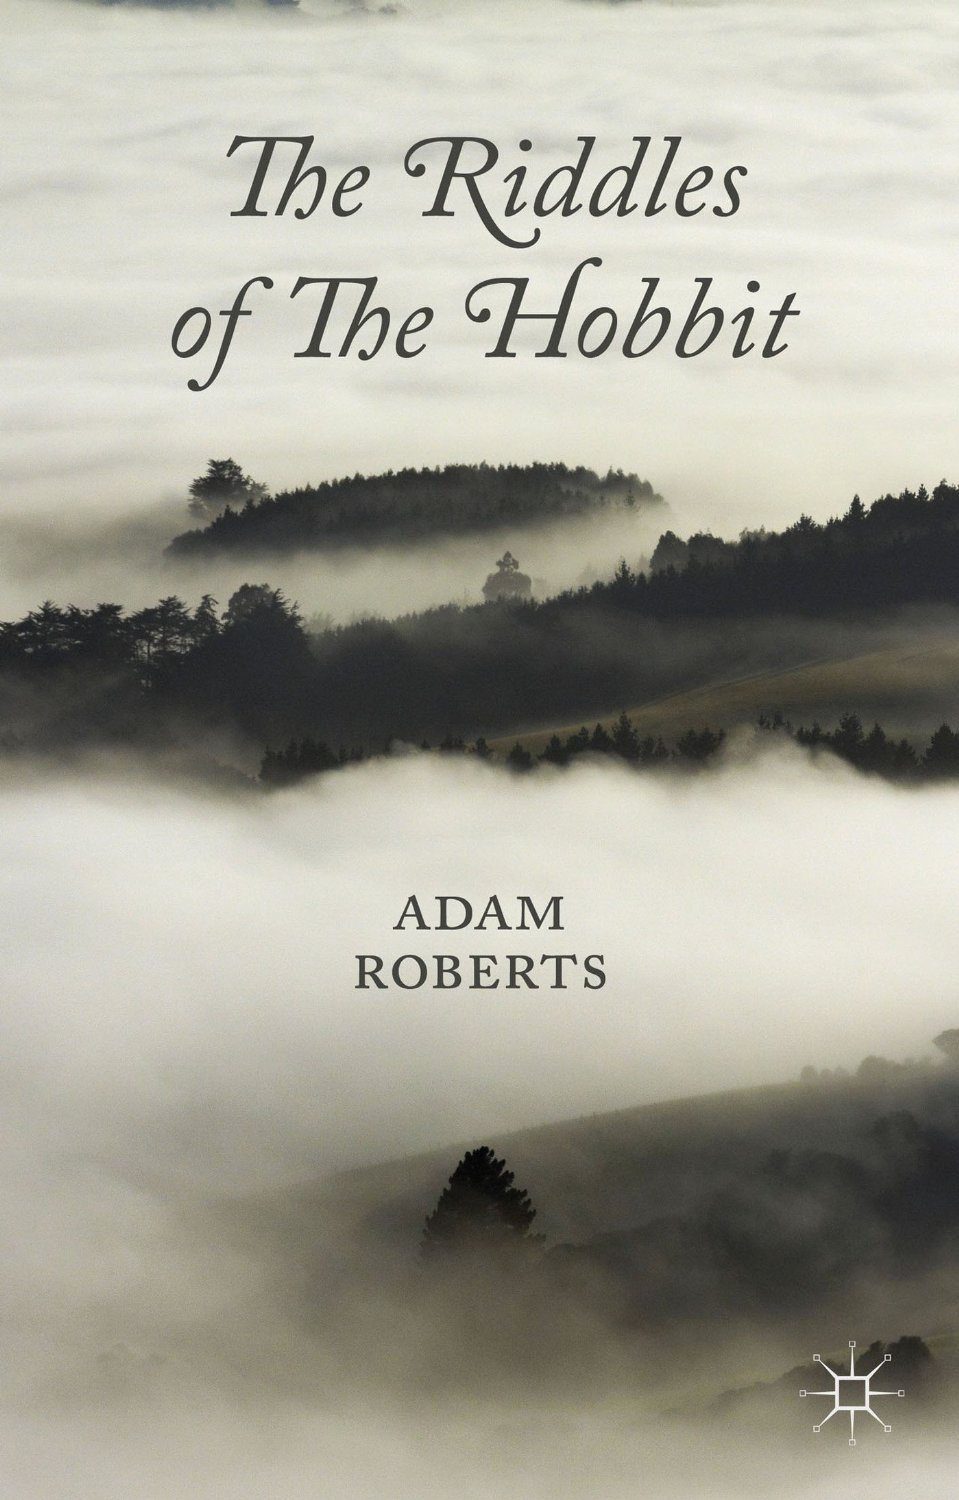 The Riddles of The Hobbit by Adam Roberts